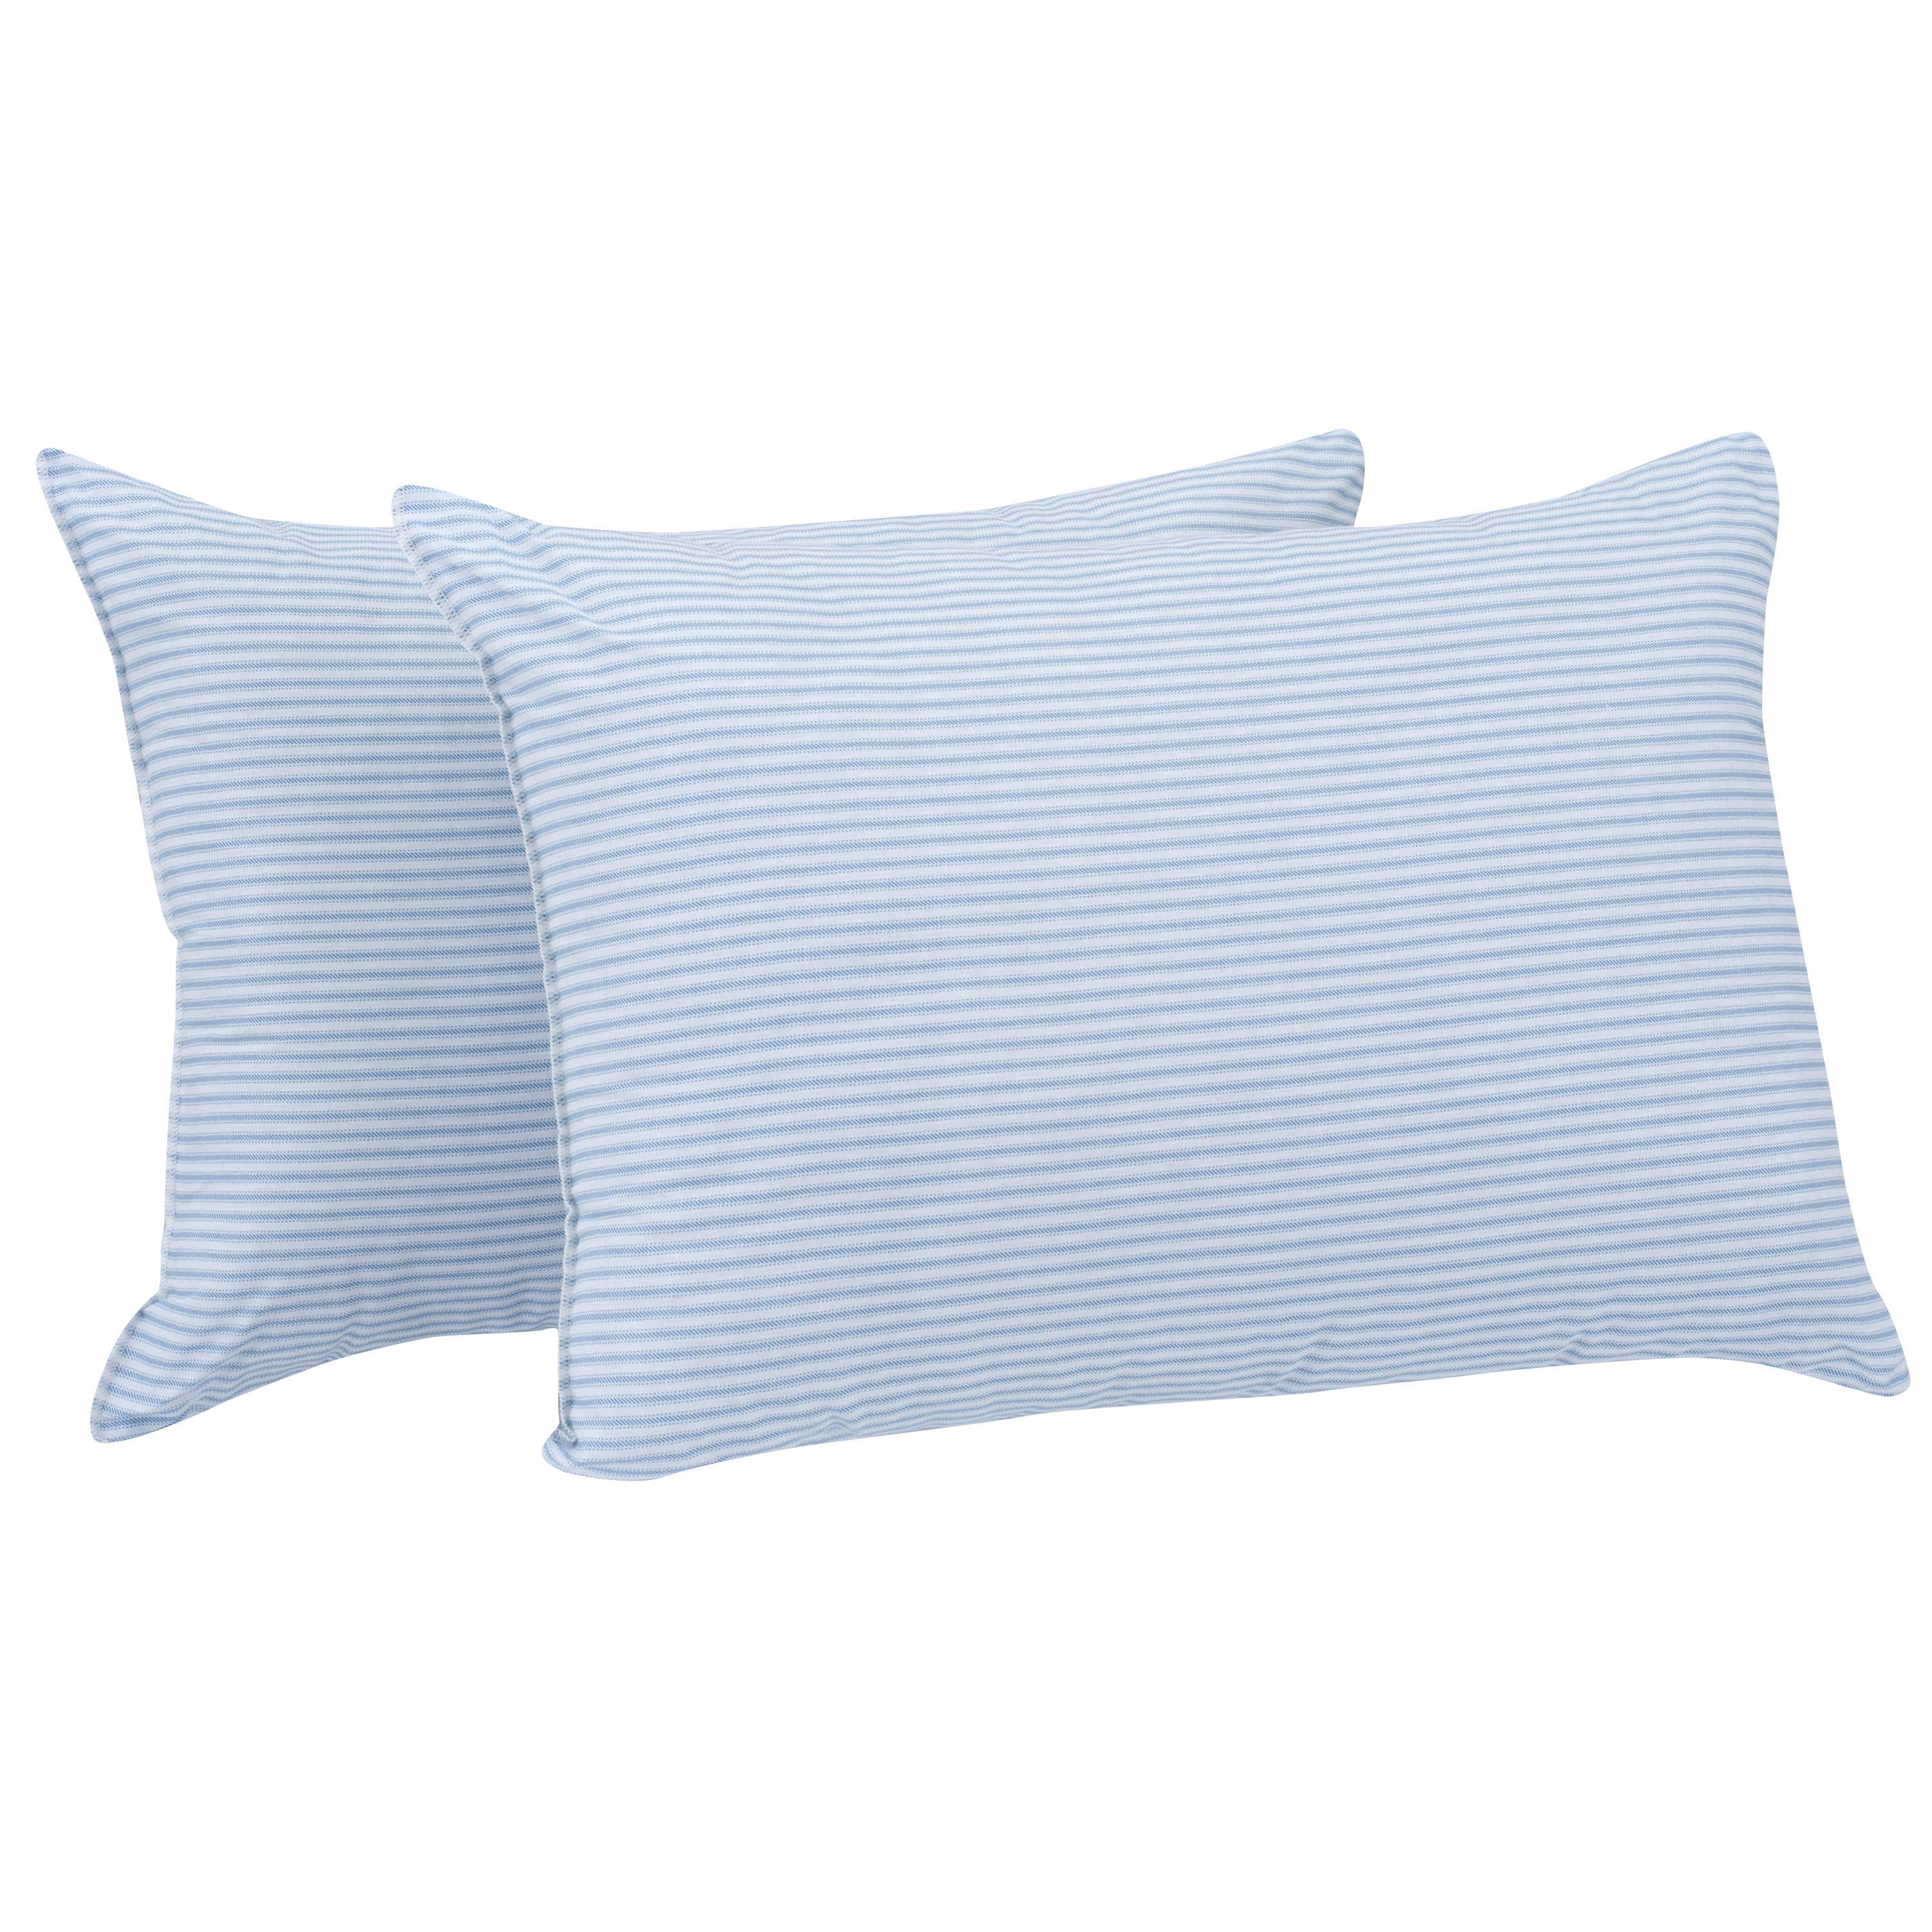 Mainstays HUGE Bed Pillow, Jumbo, 2 Pack - image 3 of 7